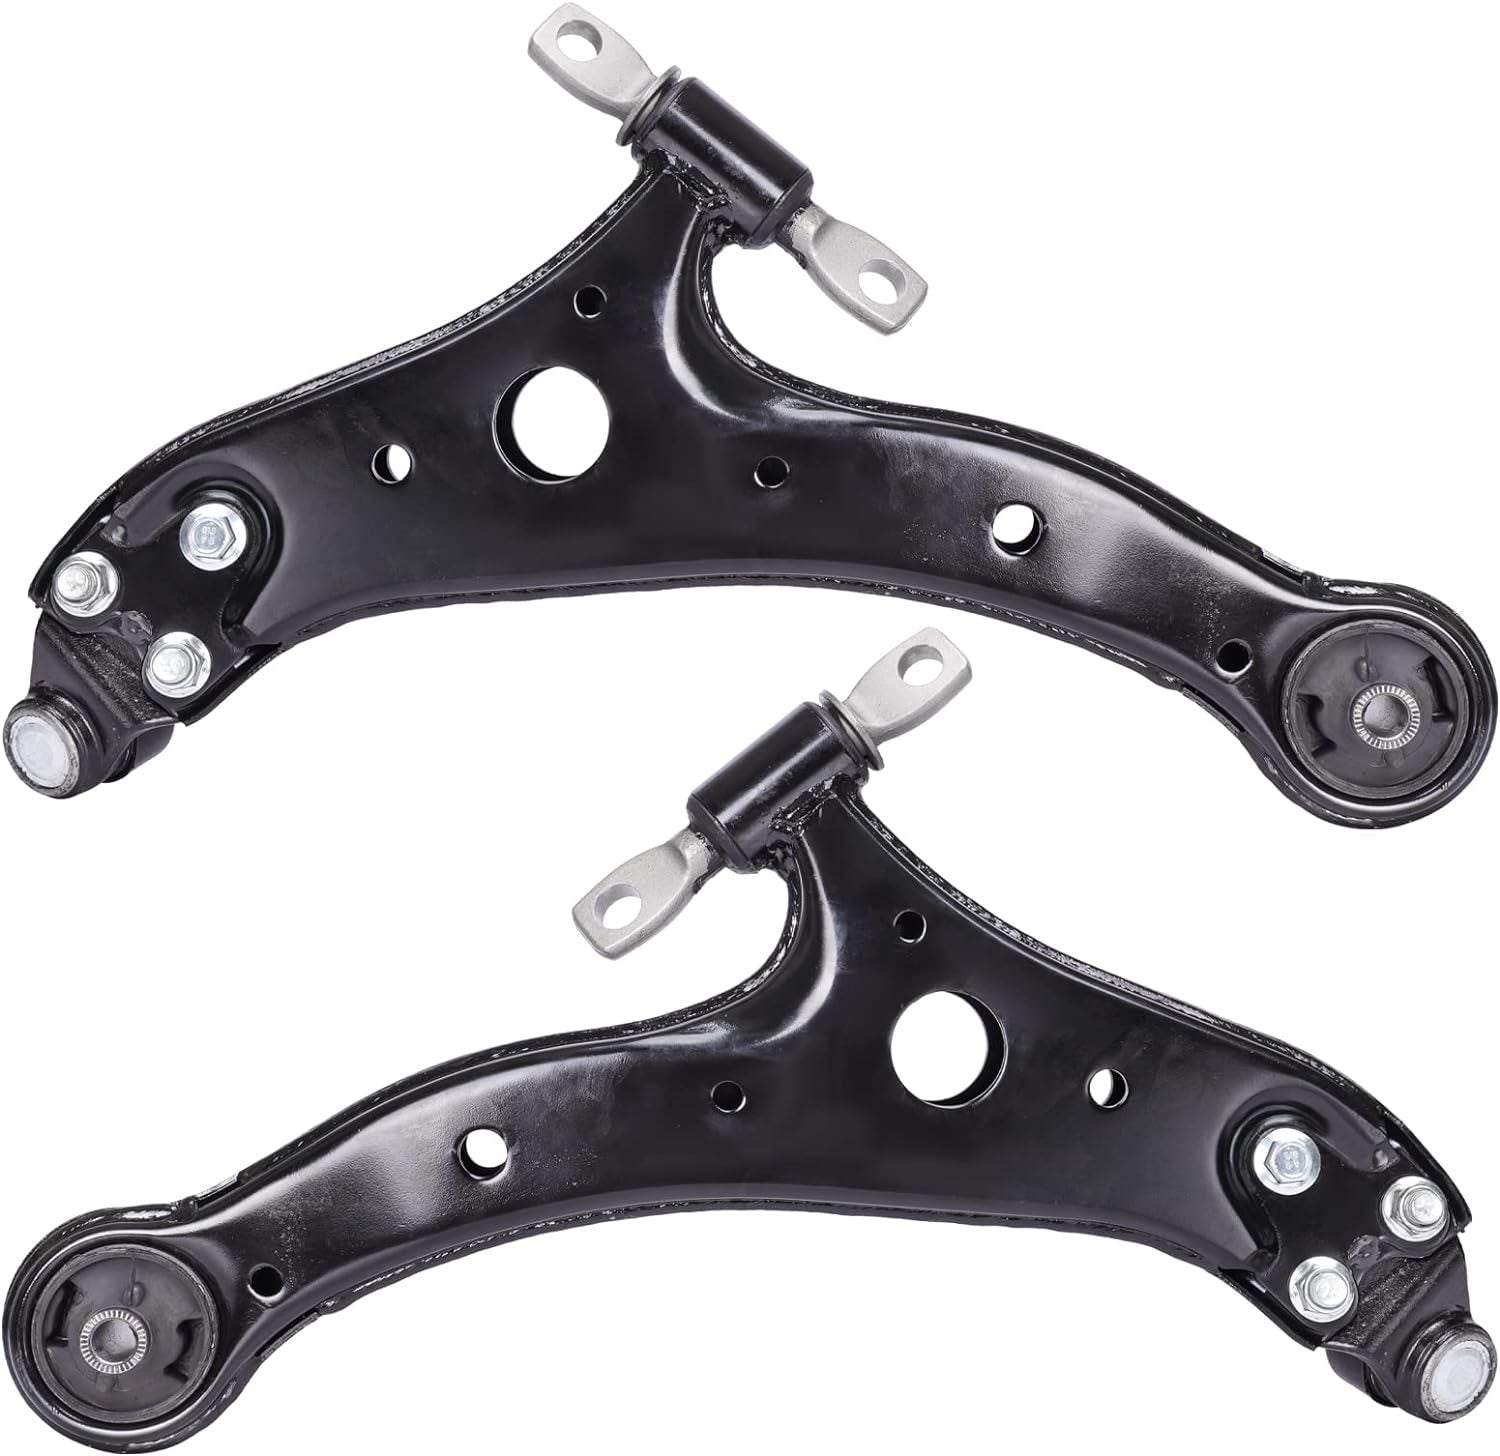 LCWRGS 2pcs Front Lower Control Arm W/Ball Joint Replacement For Lexus ES300 ES330 ES350 RX330 RX350 & Toyota Avalon Camry Highlander Solara K620333 K620334